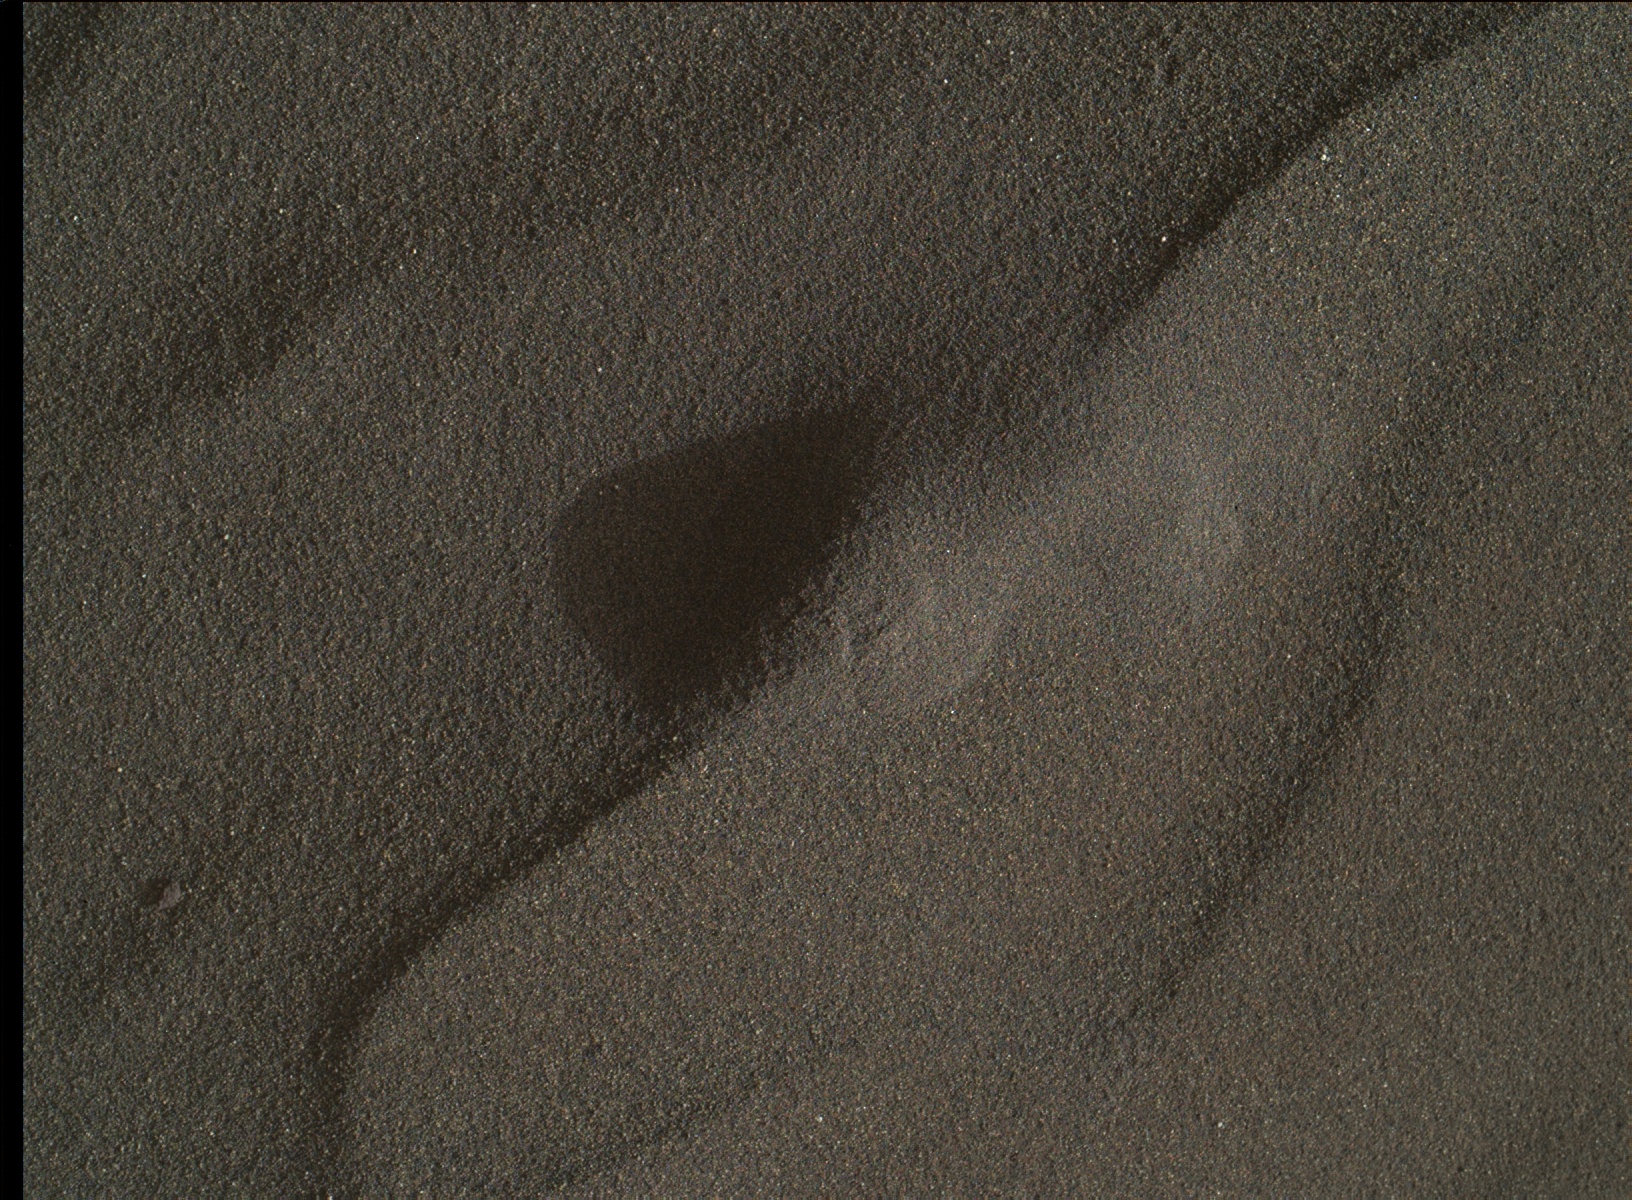 Nasa's Mars rover Curiosity acquired this image using its Mars Hand Lens Imager (MAHLI) on Sol 1226